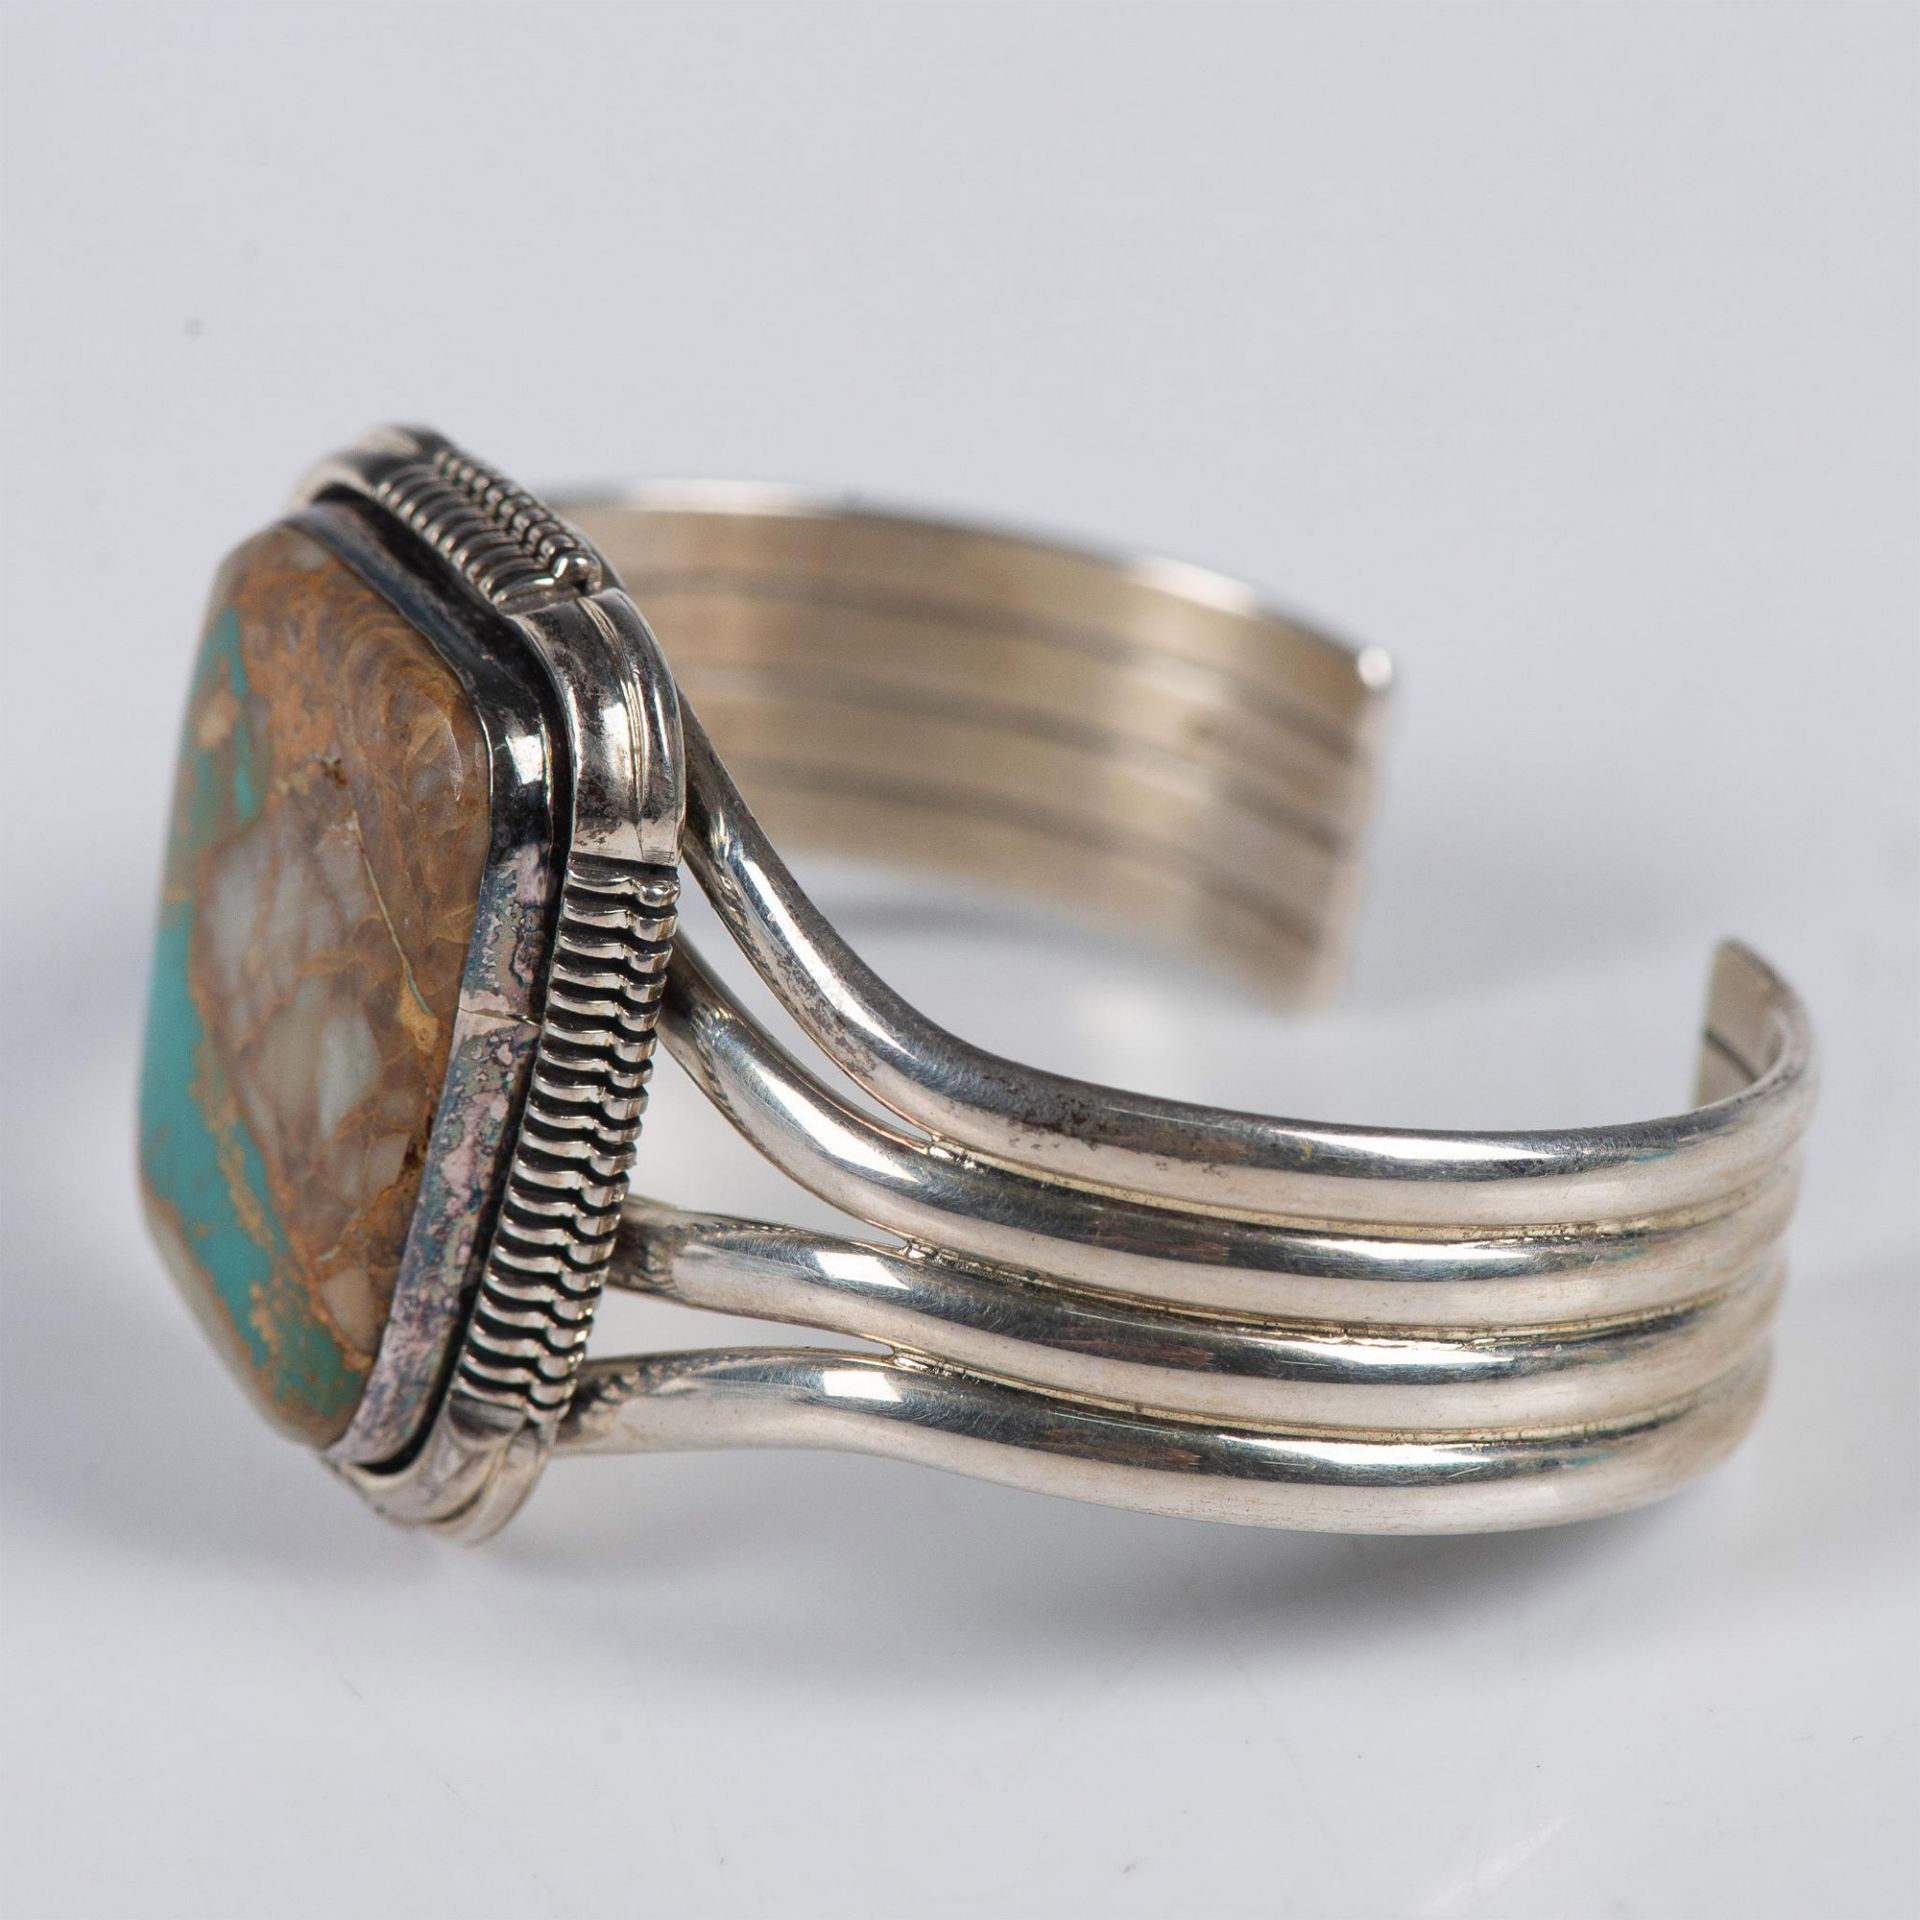 L. Yazzie Sterling Silver and Turquoise Cuff Bracelet - Image 2 of 6